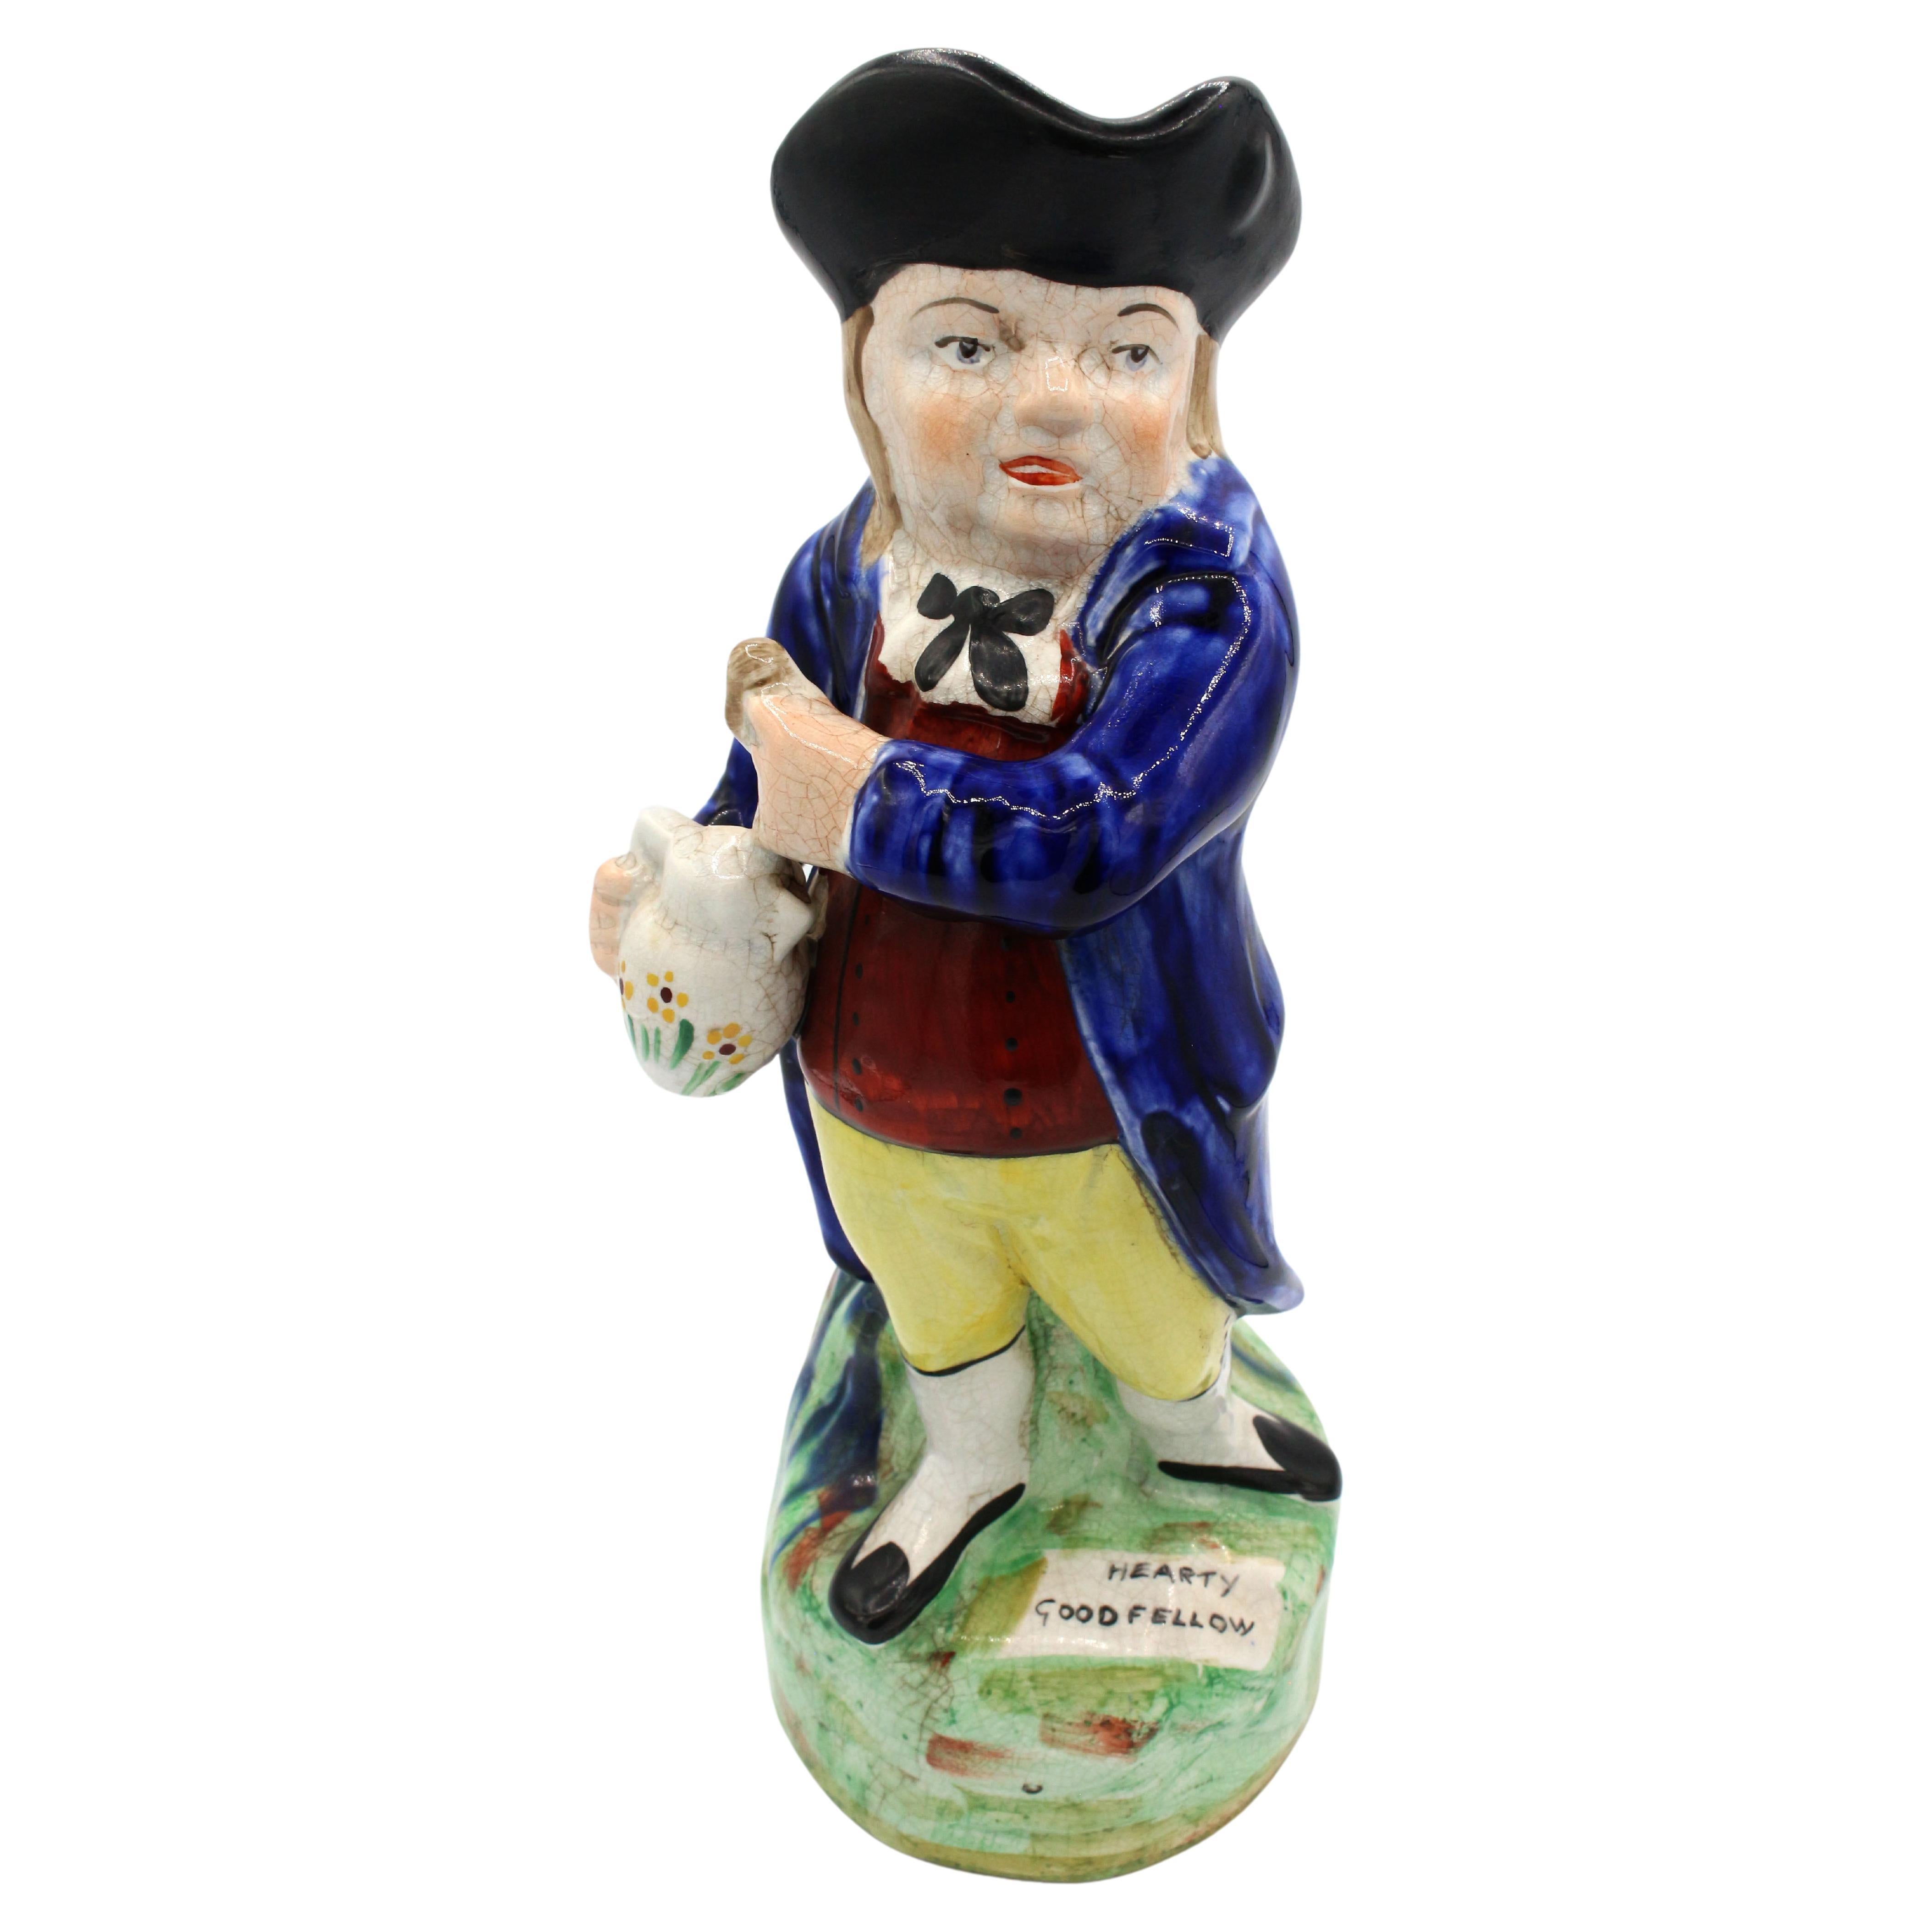 Hearty Goodfellow Toby Jug, late 19th century, Staffordshire, England For Sale